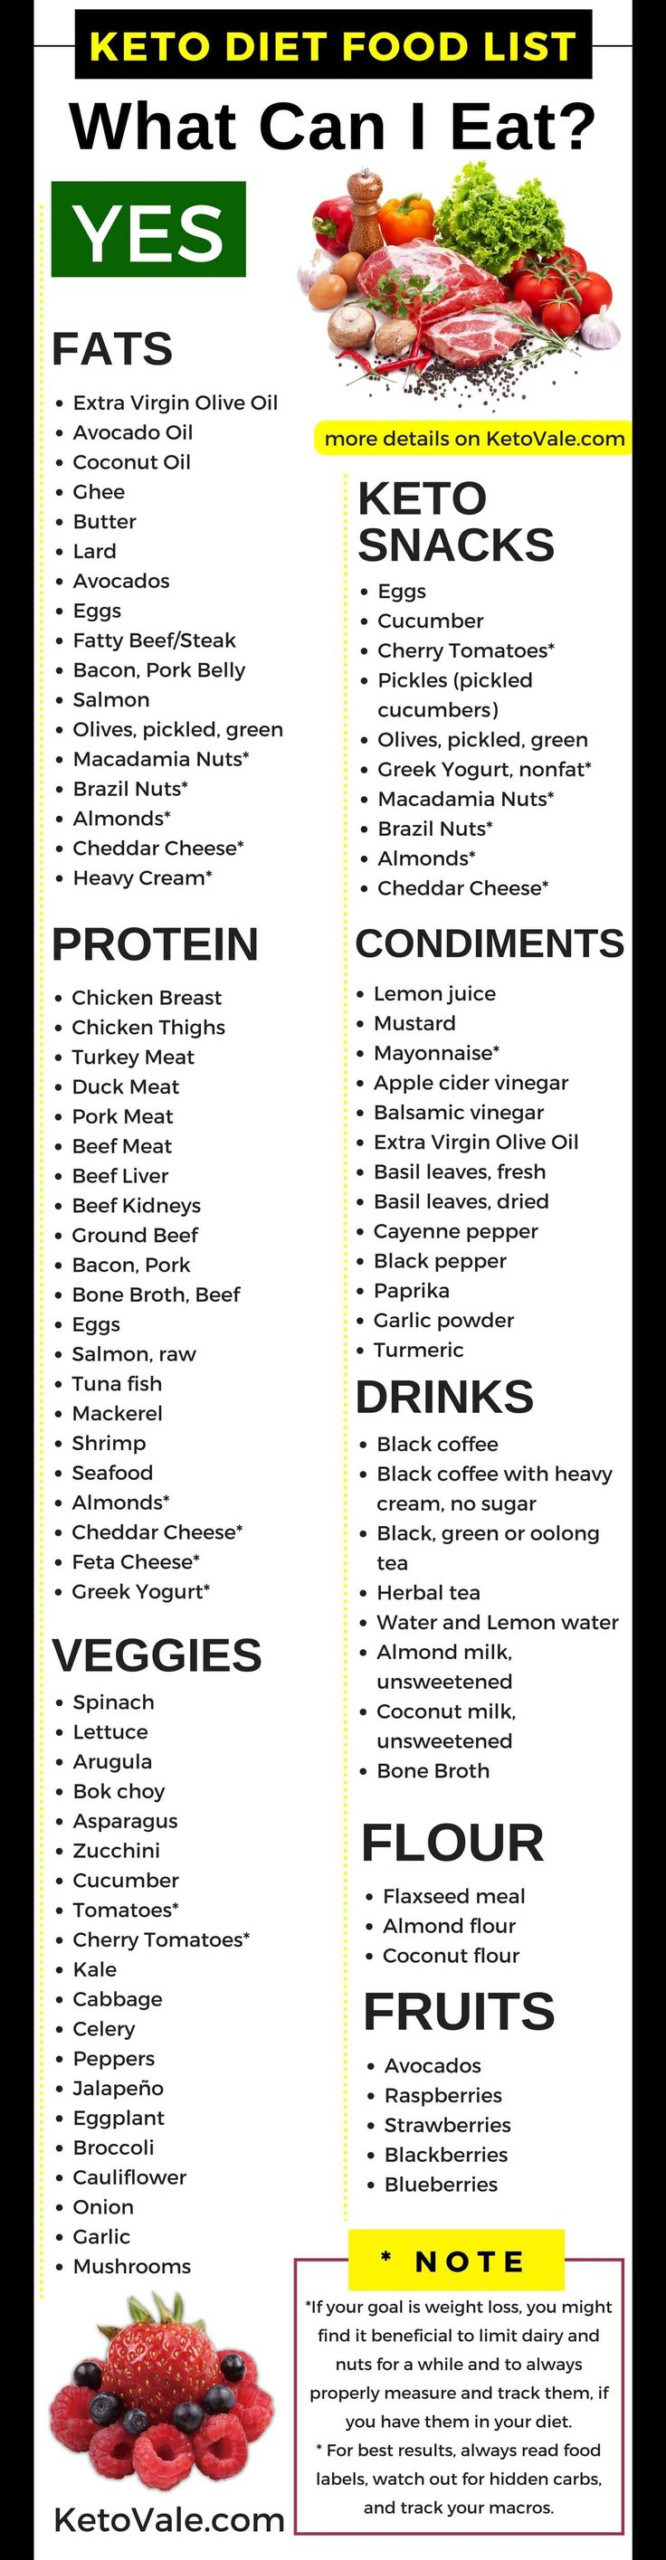 Keto Diet Food List Ultimate Low Carb Grocery Shopping Guide PDF 